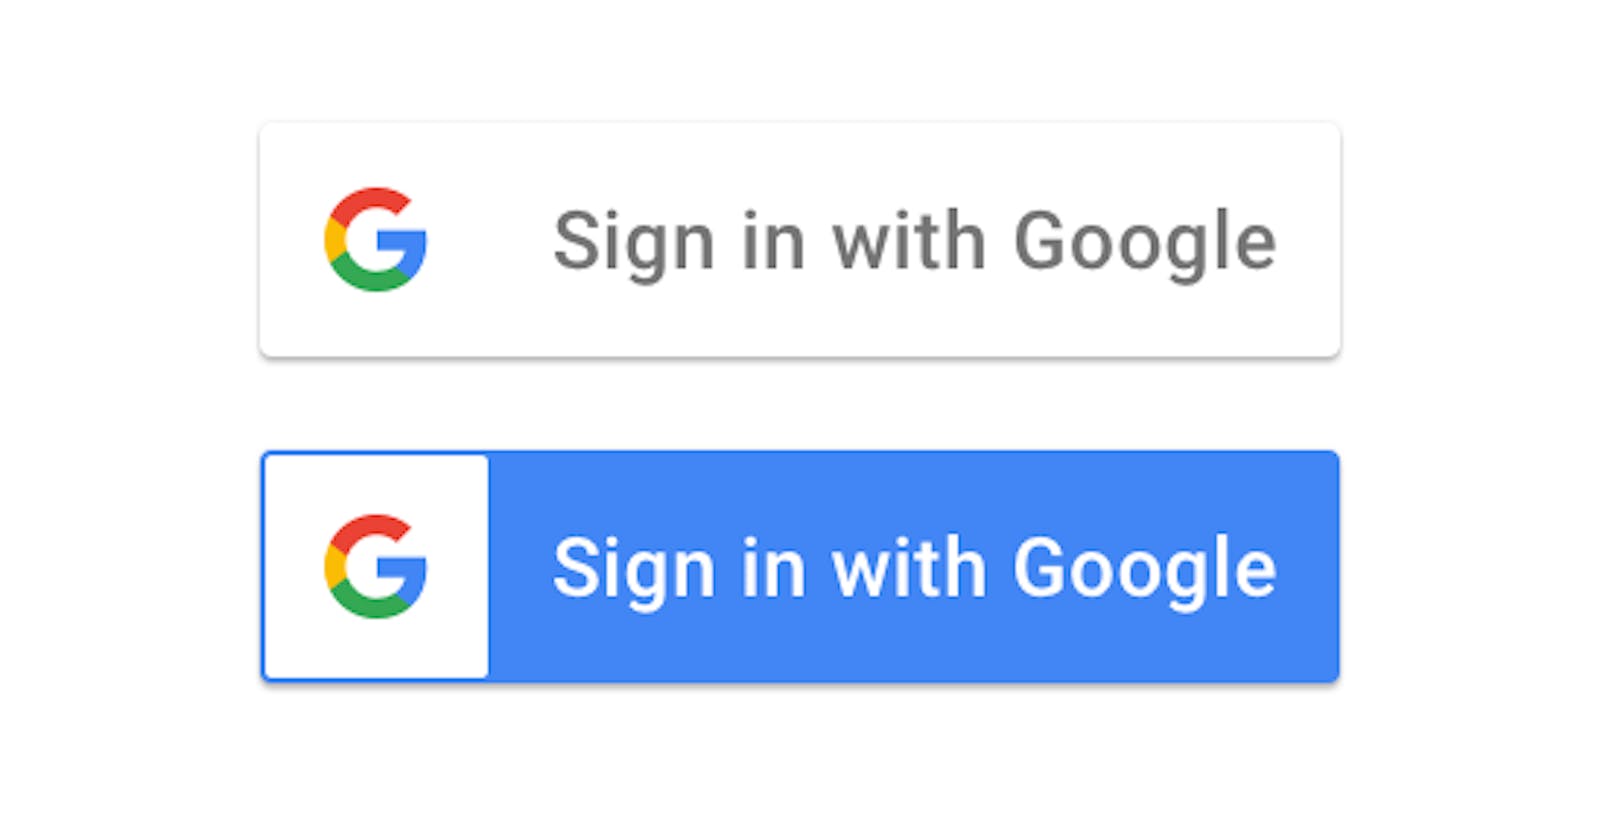 How to Implement “Sign in with Google” in Your MERN Stack App with JWT